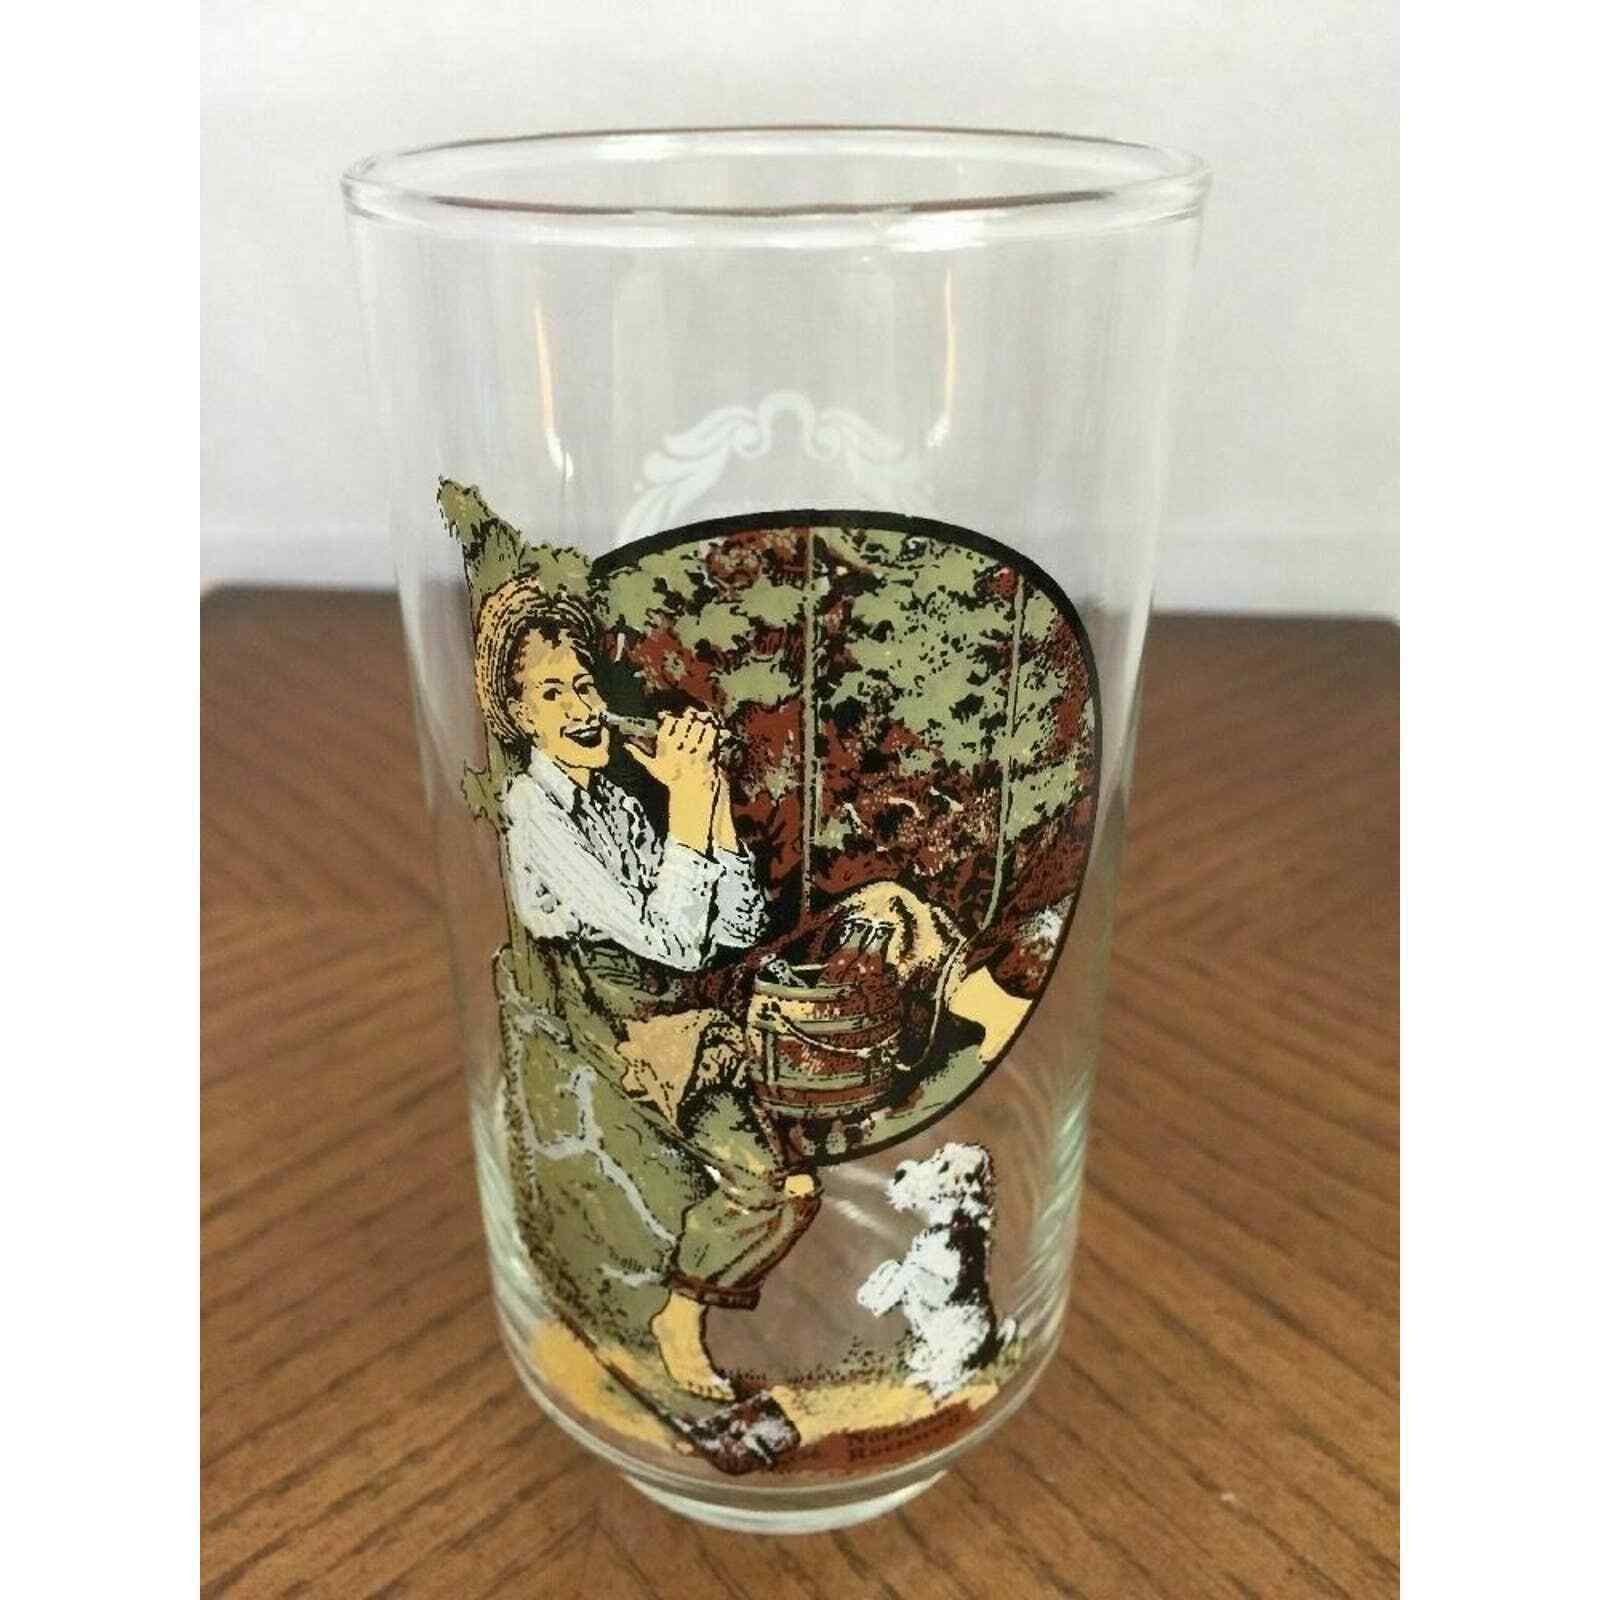 Primary image for Coca Cola Norman Rockwell Repro Drinking Glass Tumbler Barefoot Boy and Dog